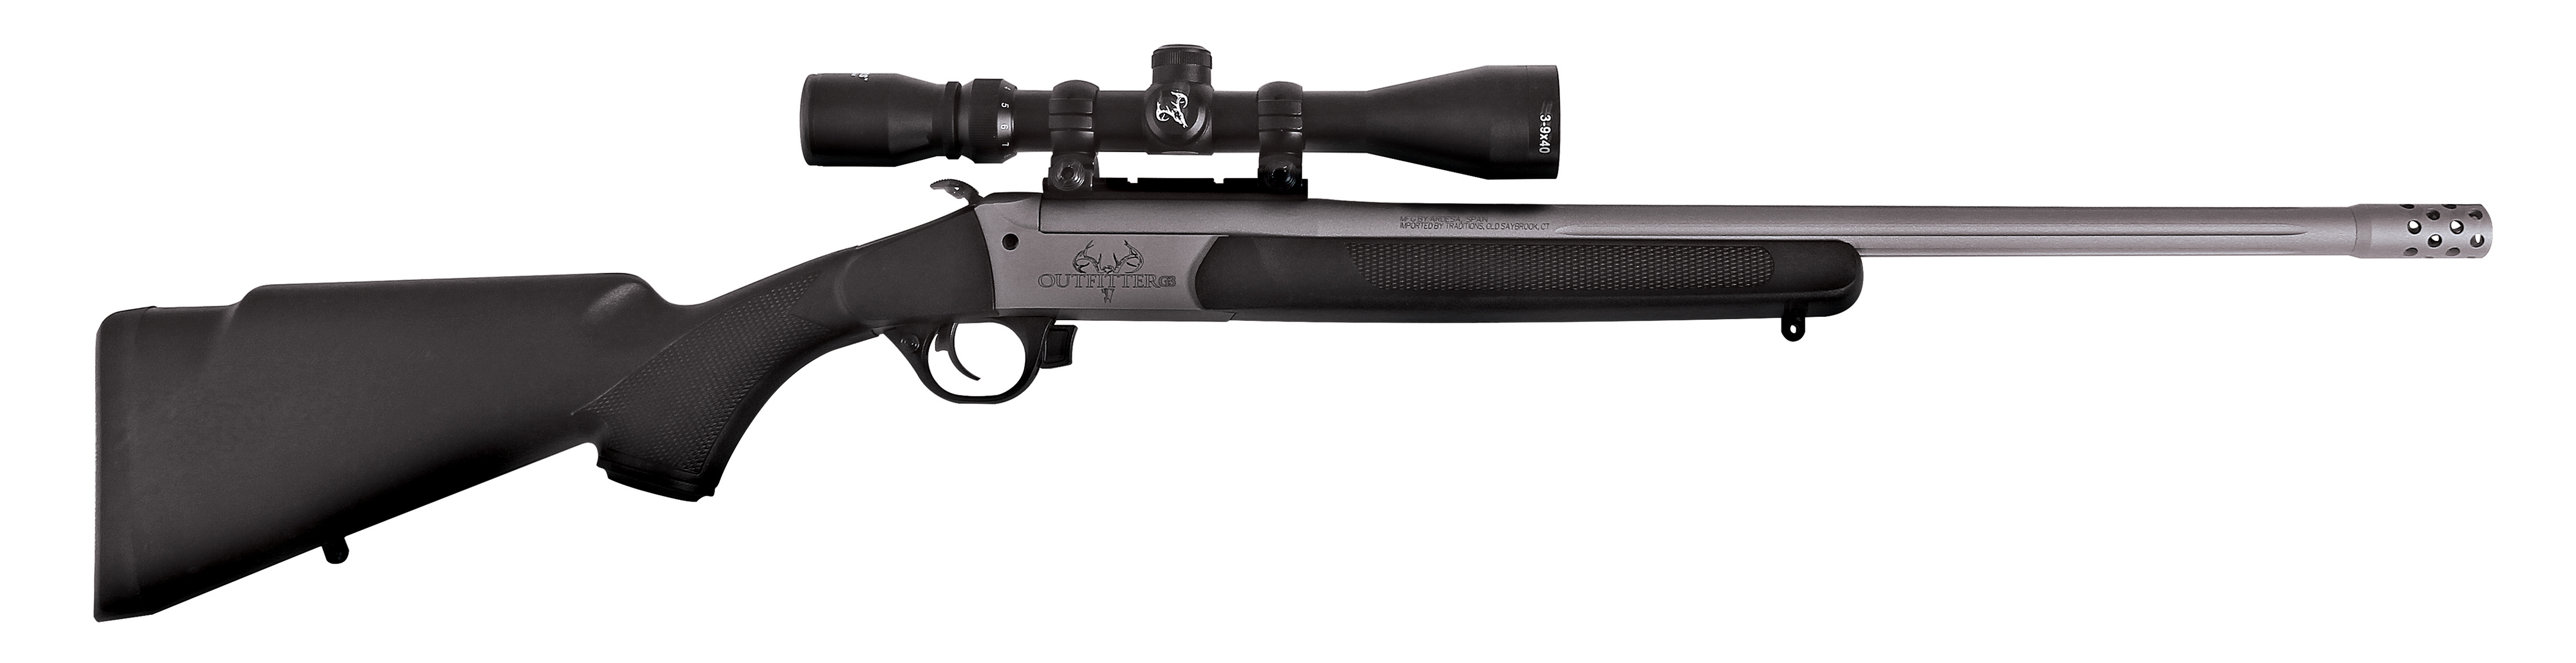 Traditions Outfitter G3 450 Bushmaster